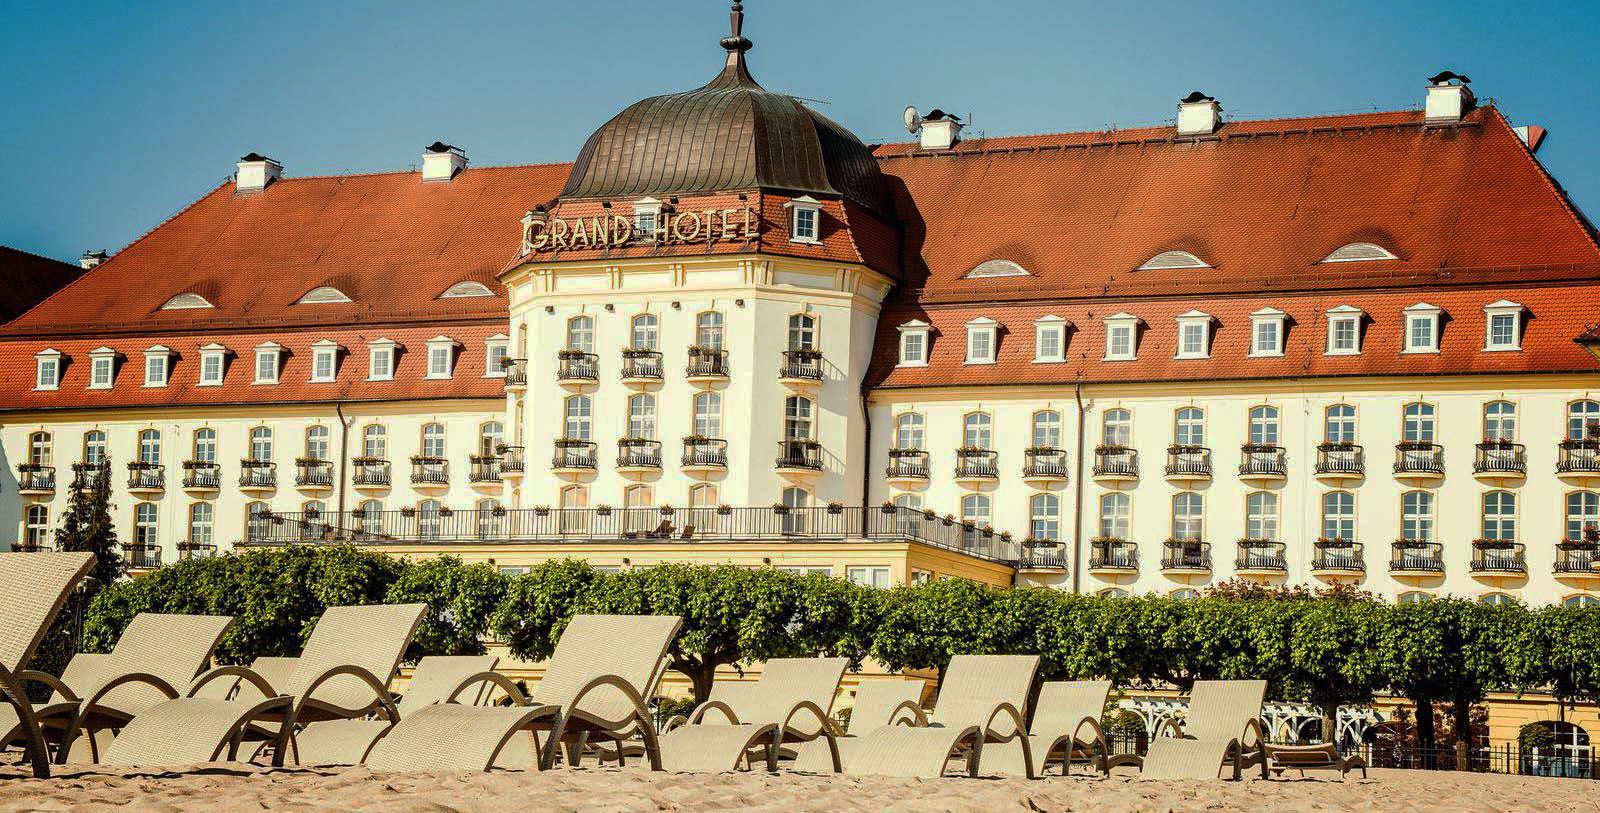 Image of Hotel Façade Sofitel Grand Sopot, 1927, Member of Historic Hotels Worldwide, in Sopot, Poland, Overview